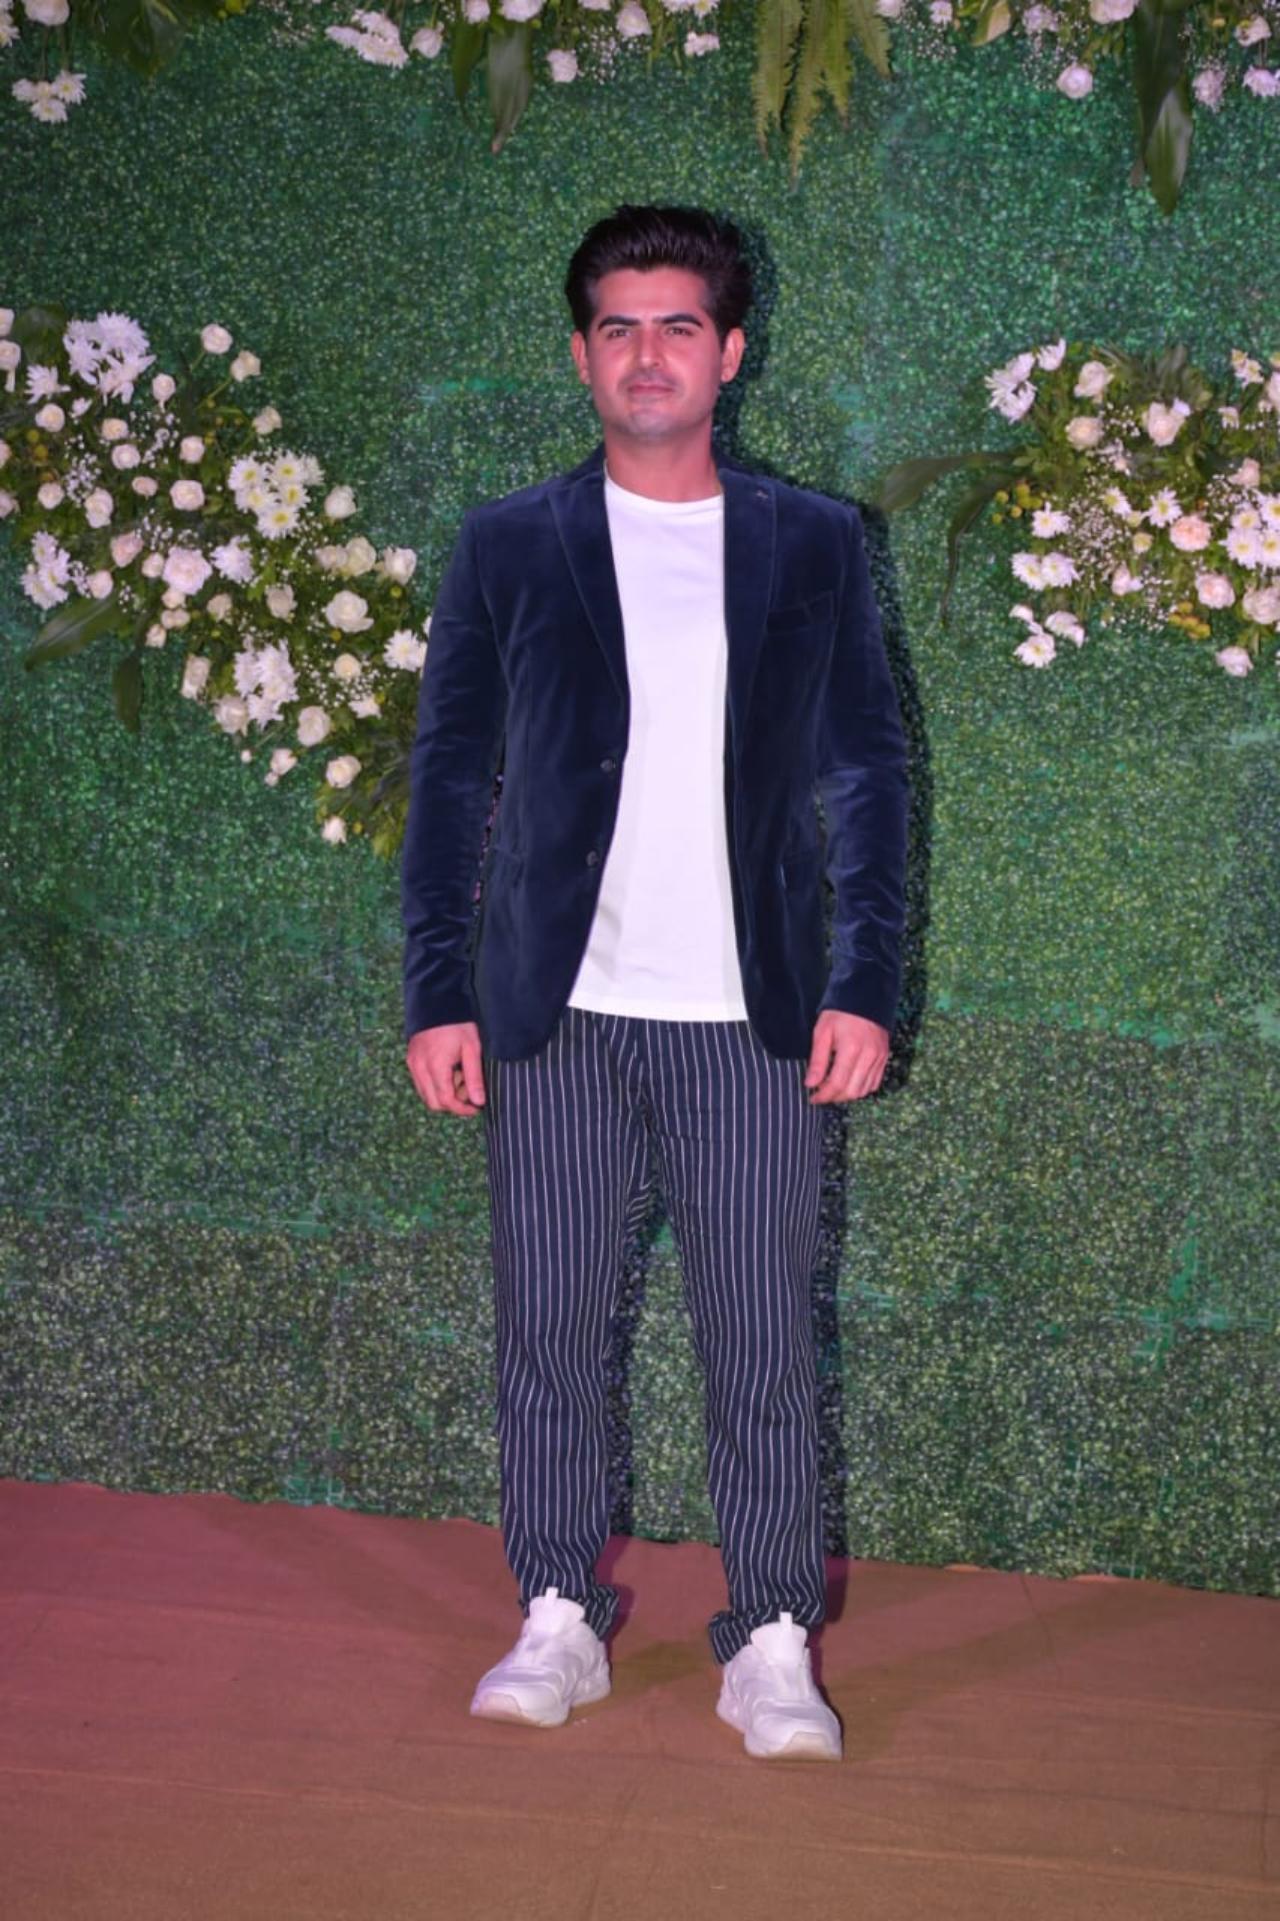 Actor Om Kapoor who was one of the leads in 'Pyaar ka Punchnama 2' was also spotted at the reception